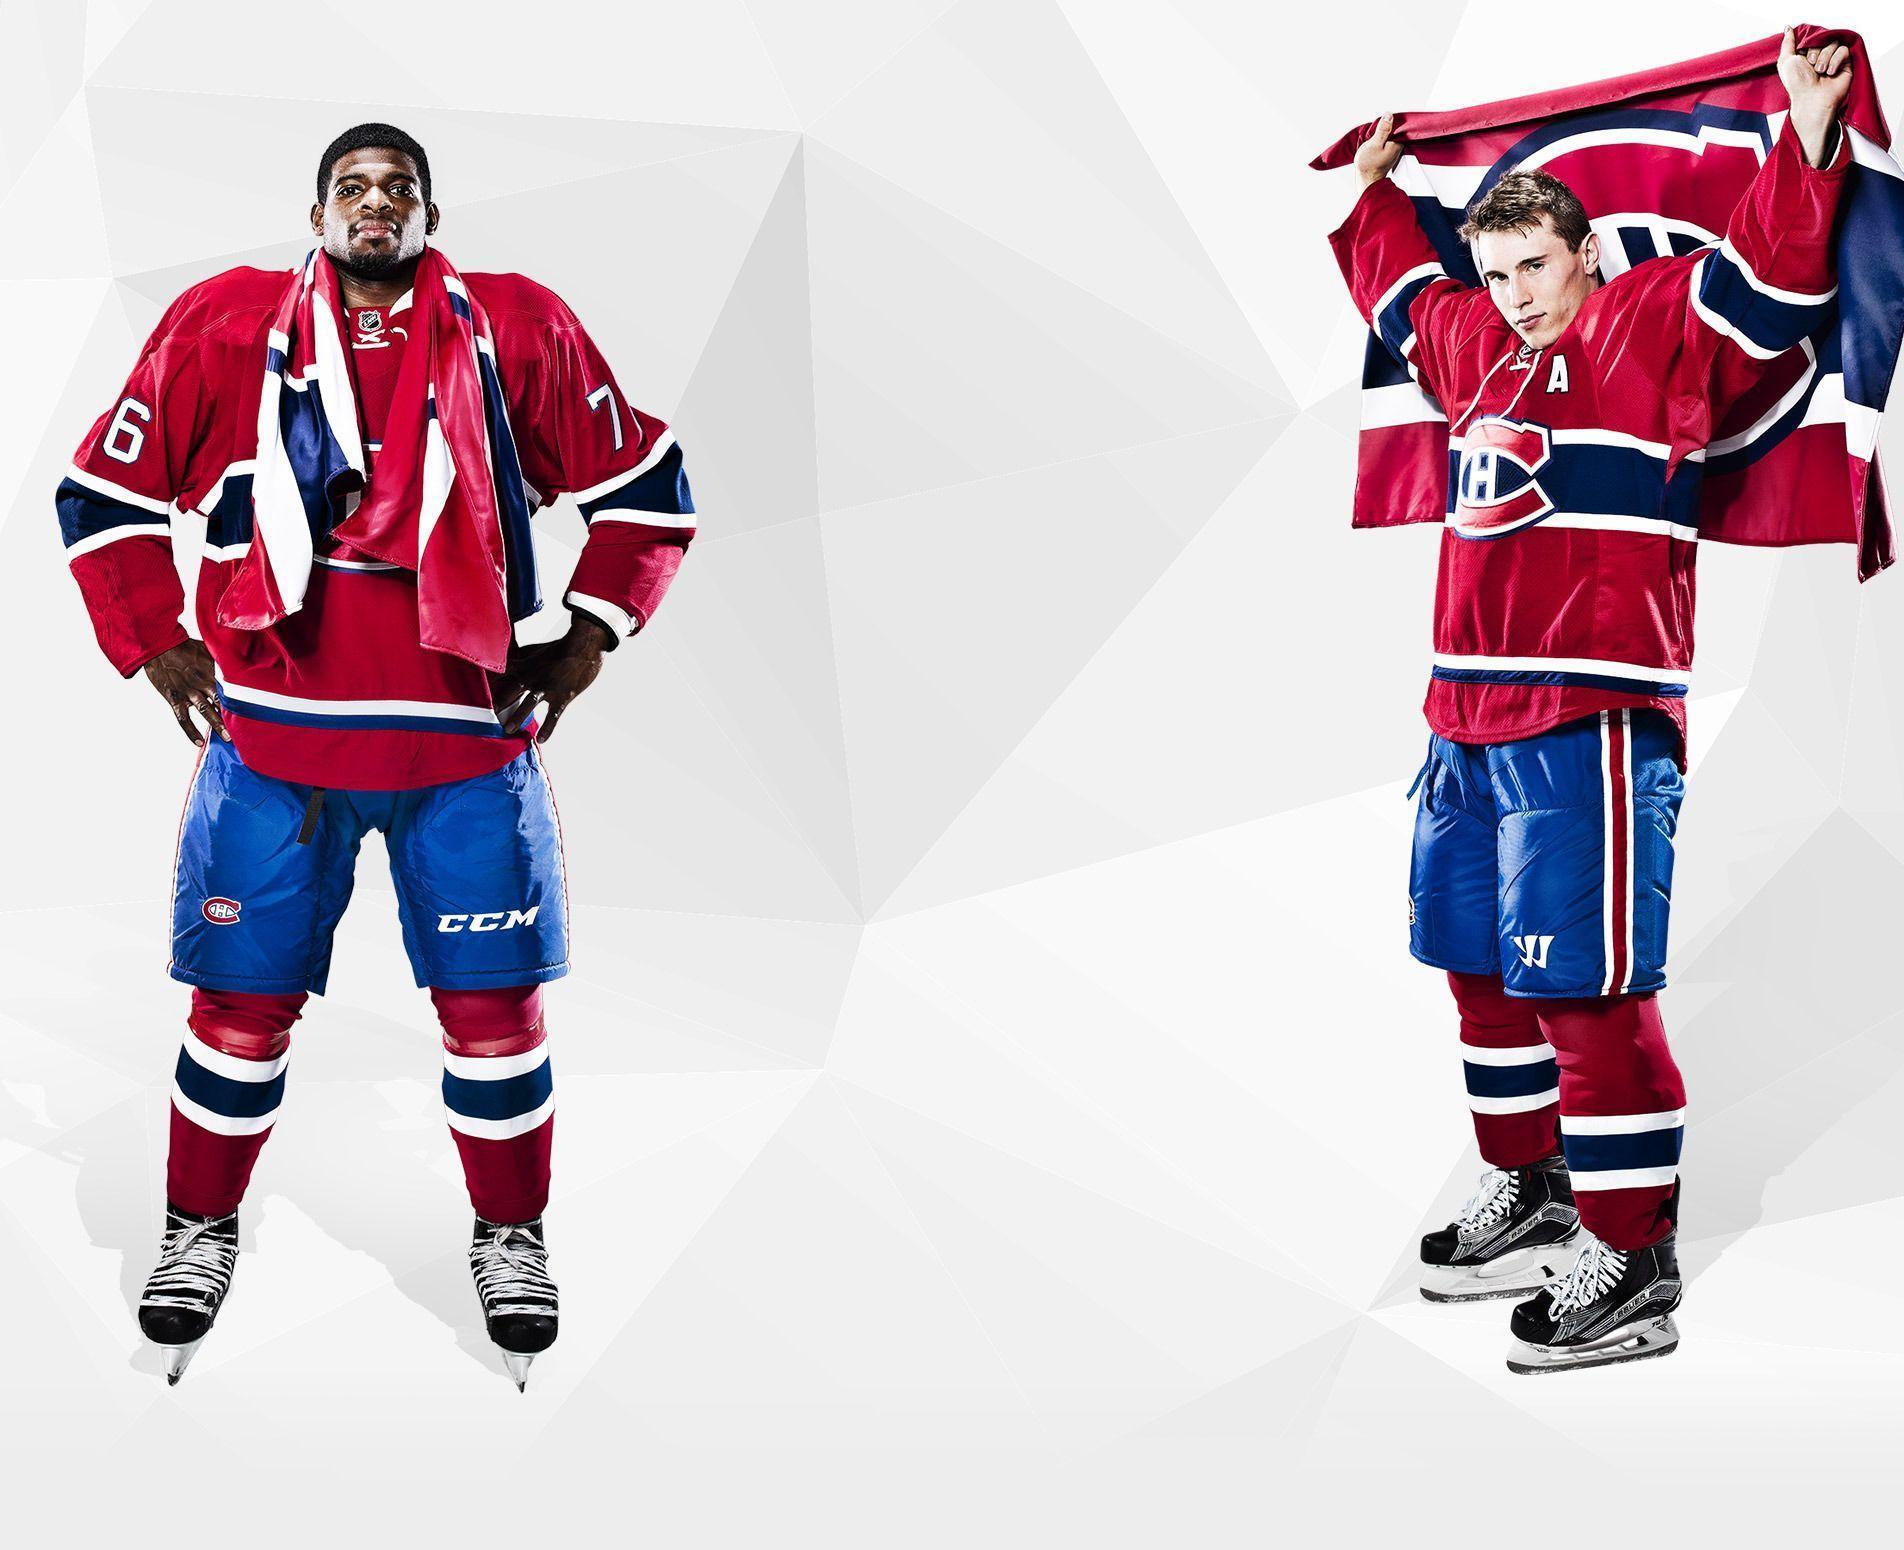 Ever wanted the other wallpaper used on the Habs website? Here you